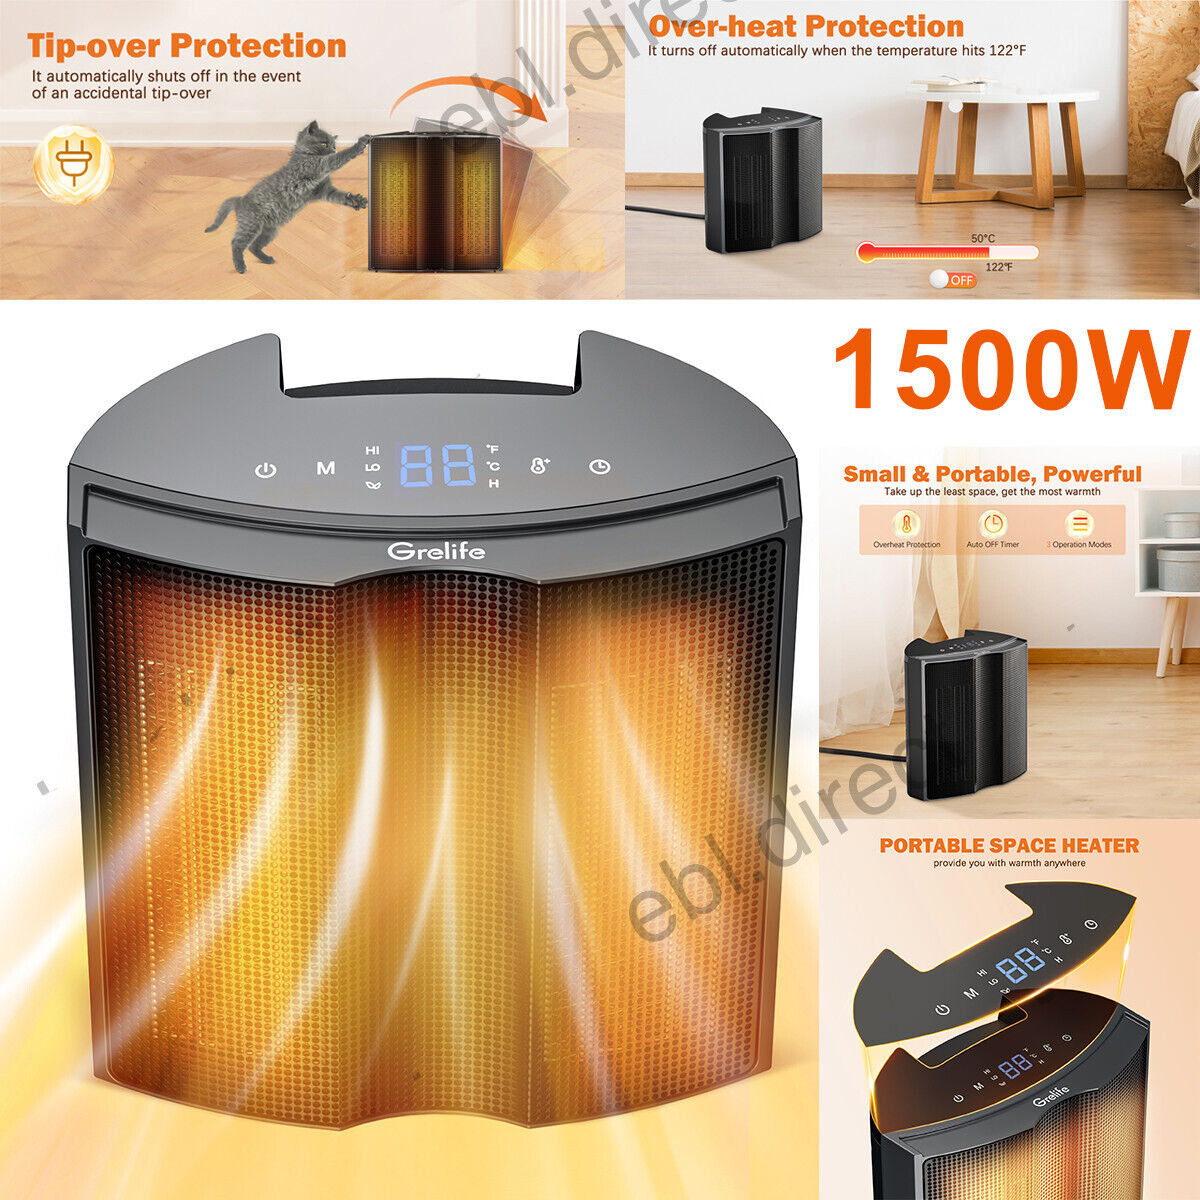 1500W Portable Electric Space Heater Garage Hot Air Fan for Indoor Large Room